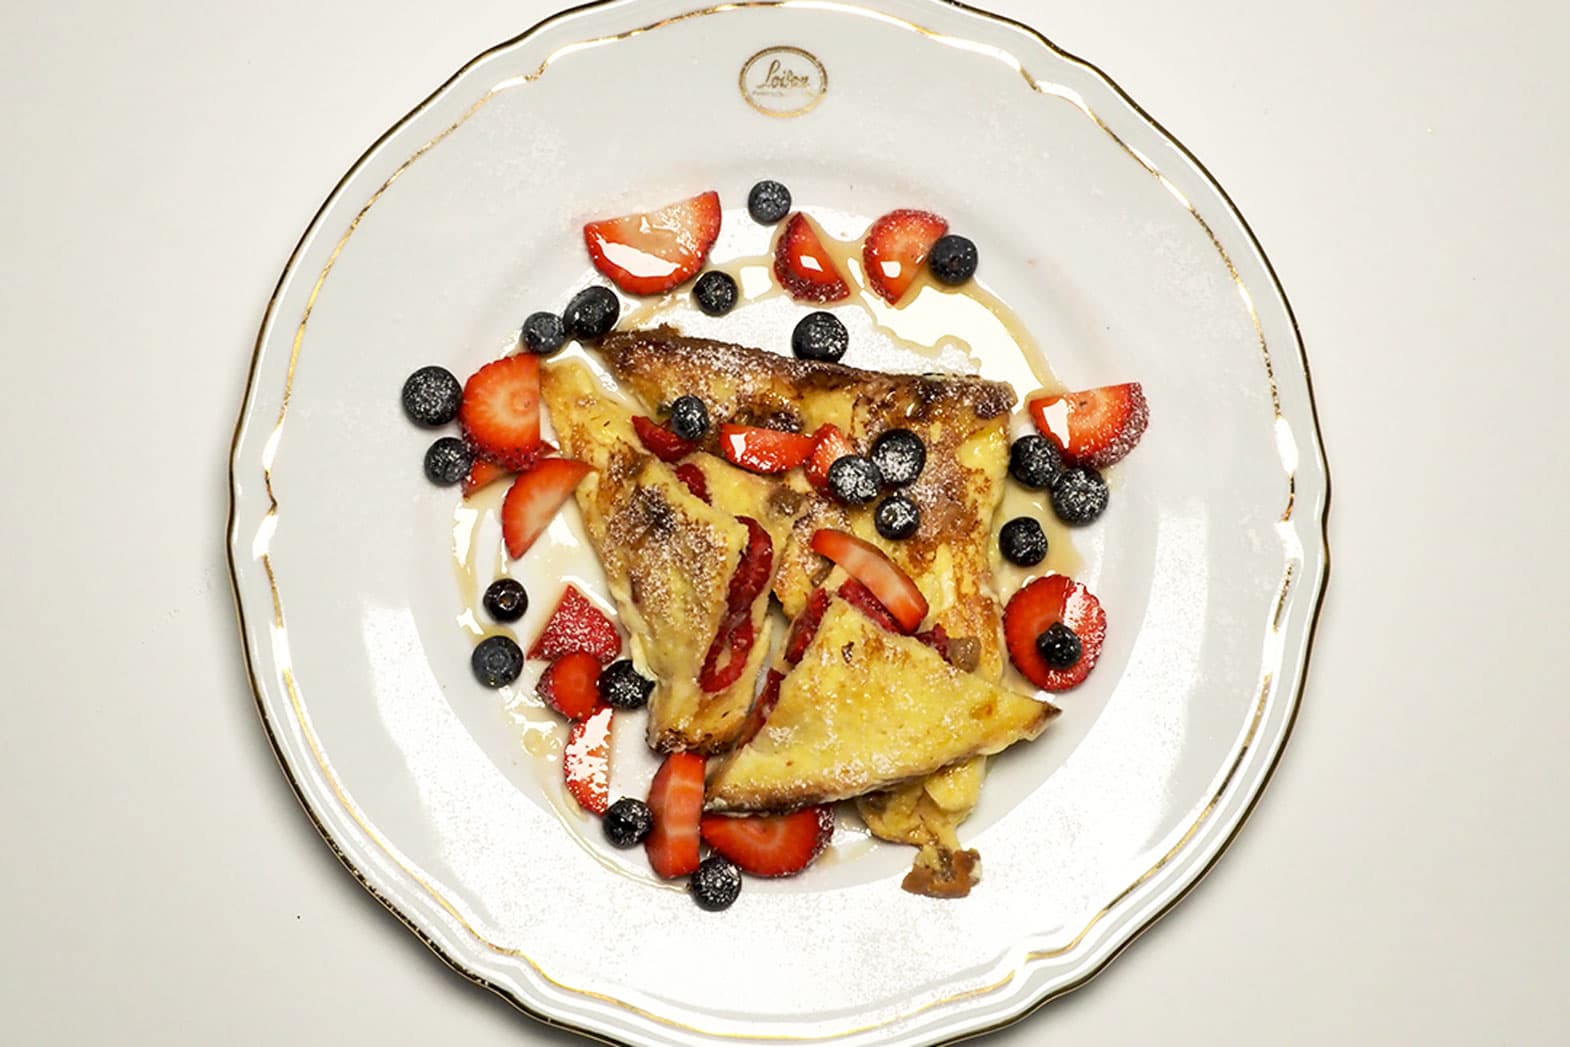 Panettone French Toast Recipe